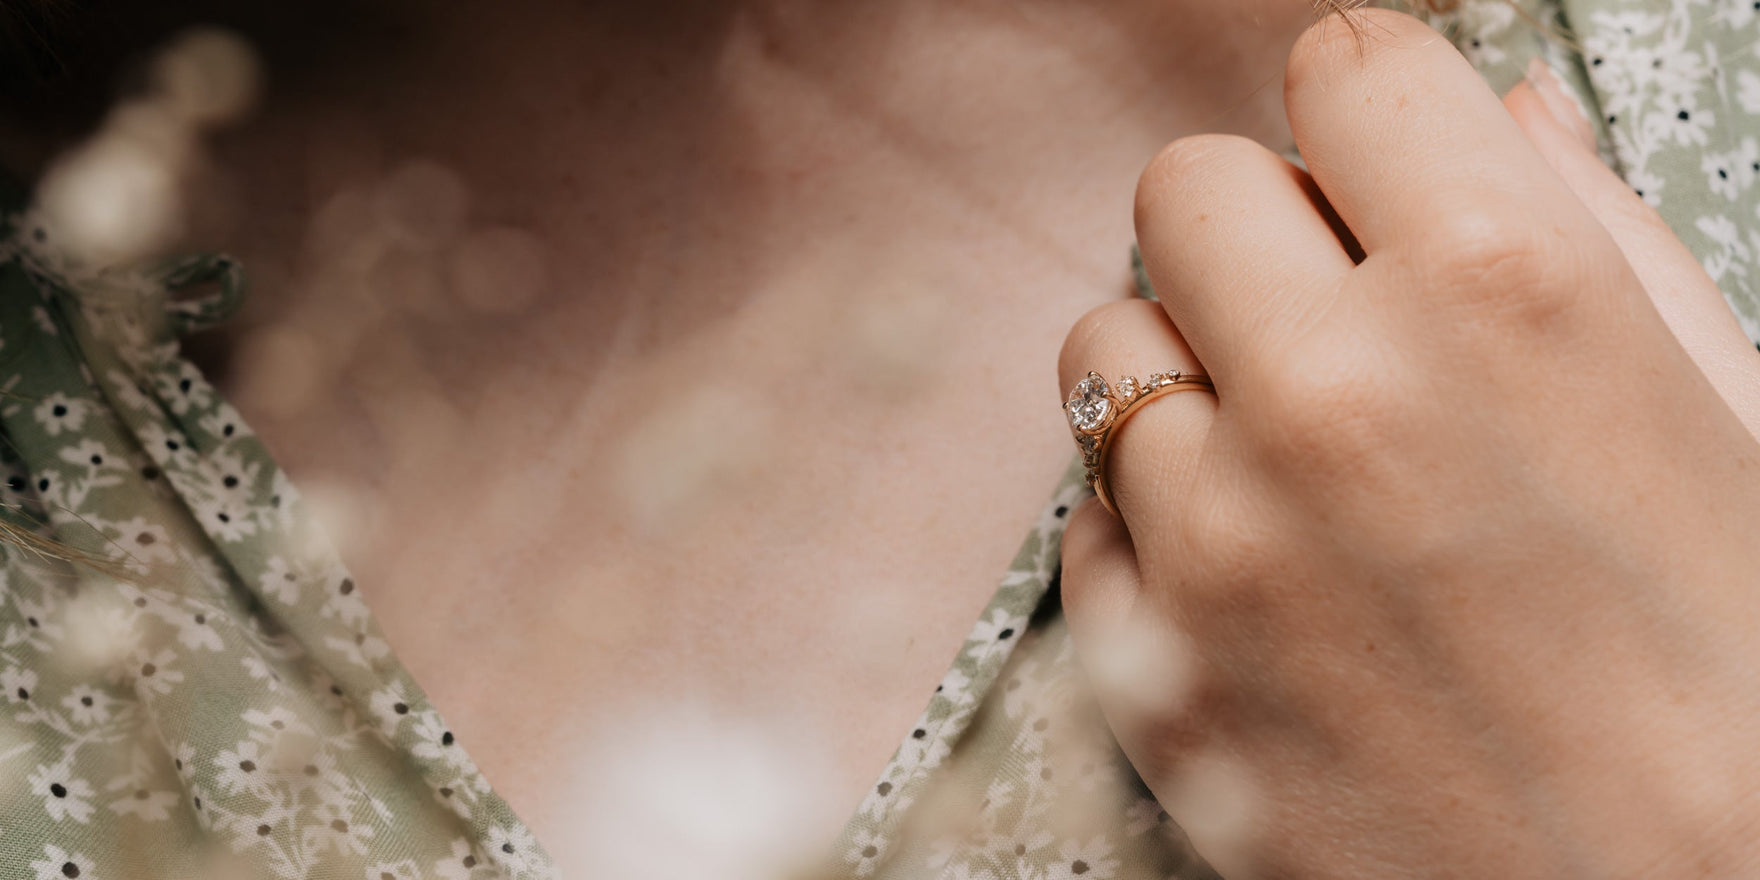 Choosing A Ring Your Partner Will Love